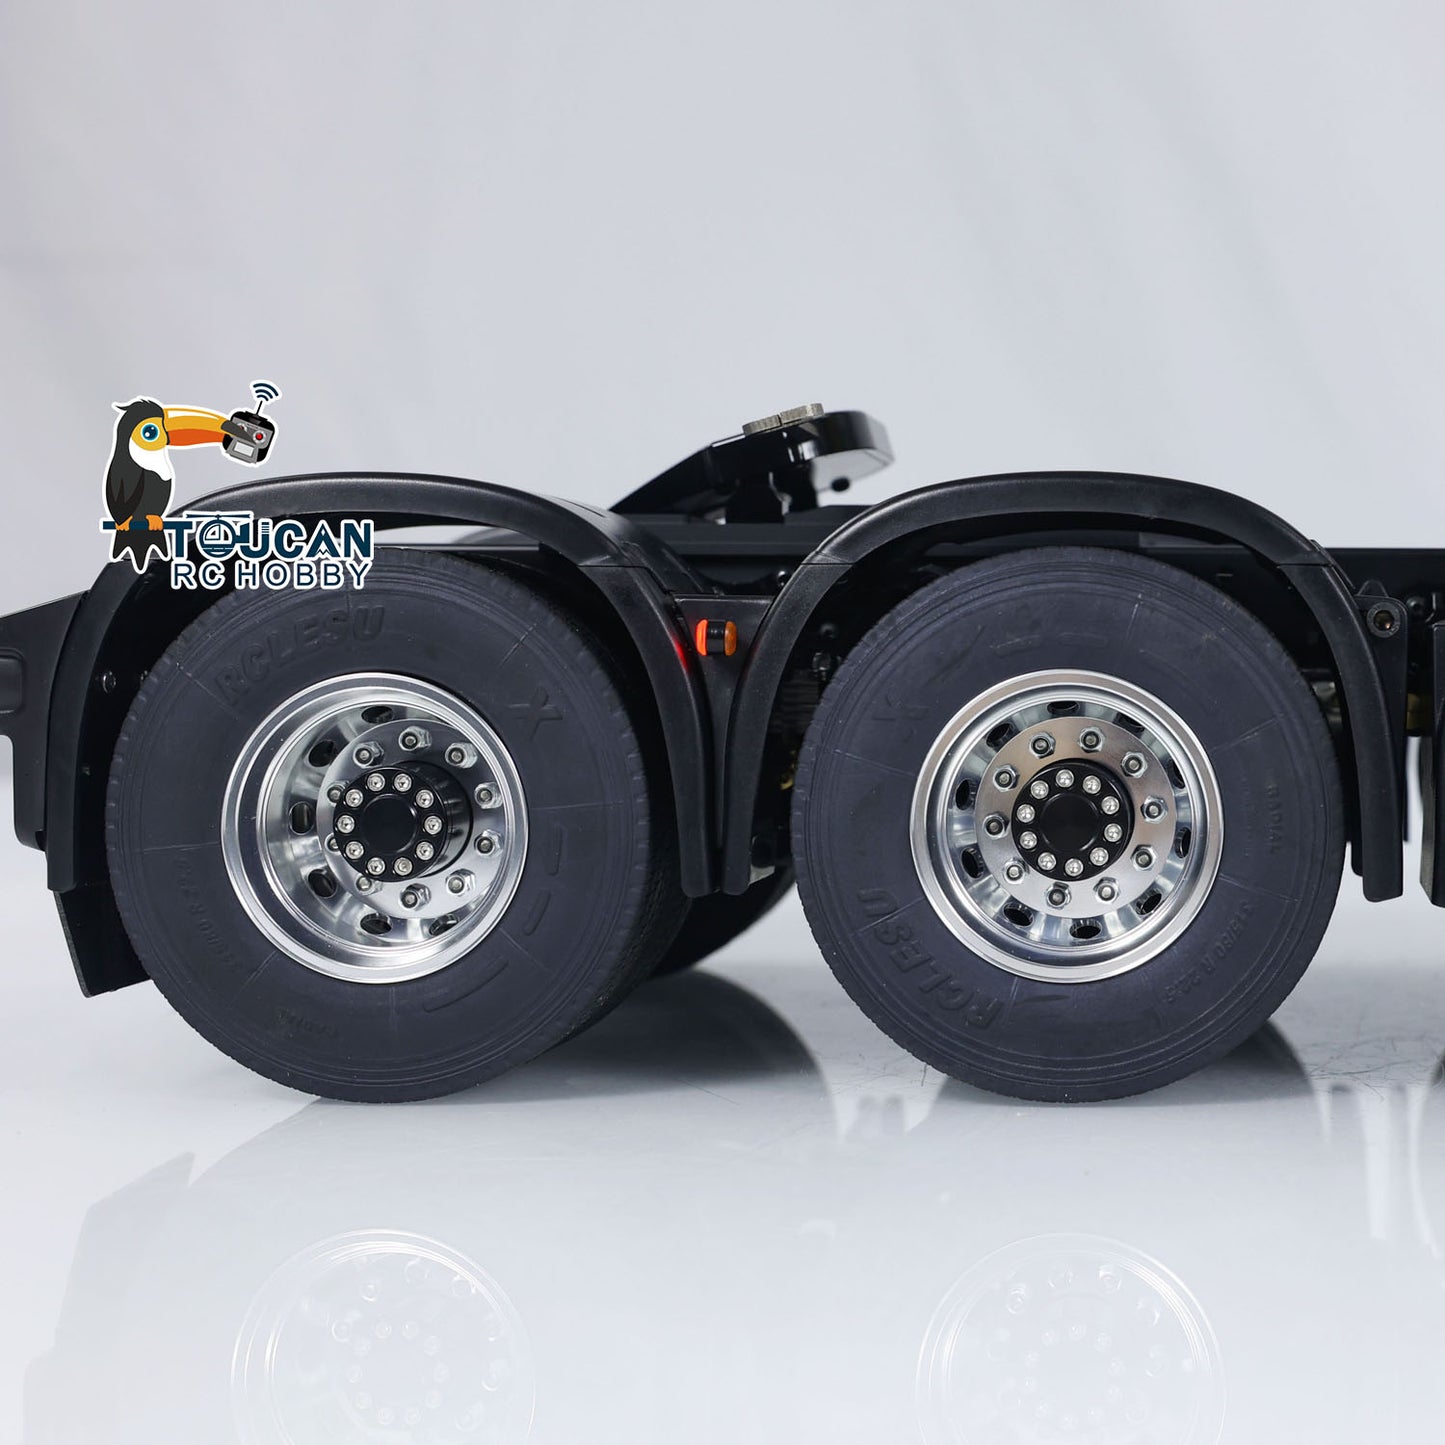 LESU Metal Chassis 1/14 RC Tractor Truck 8X8 RC Car Customized